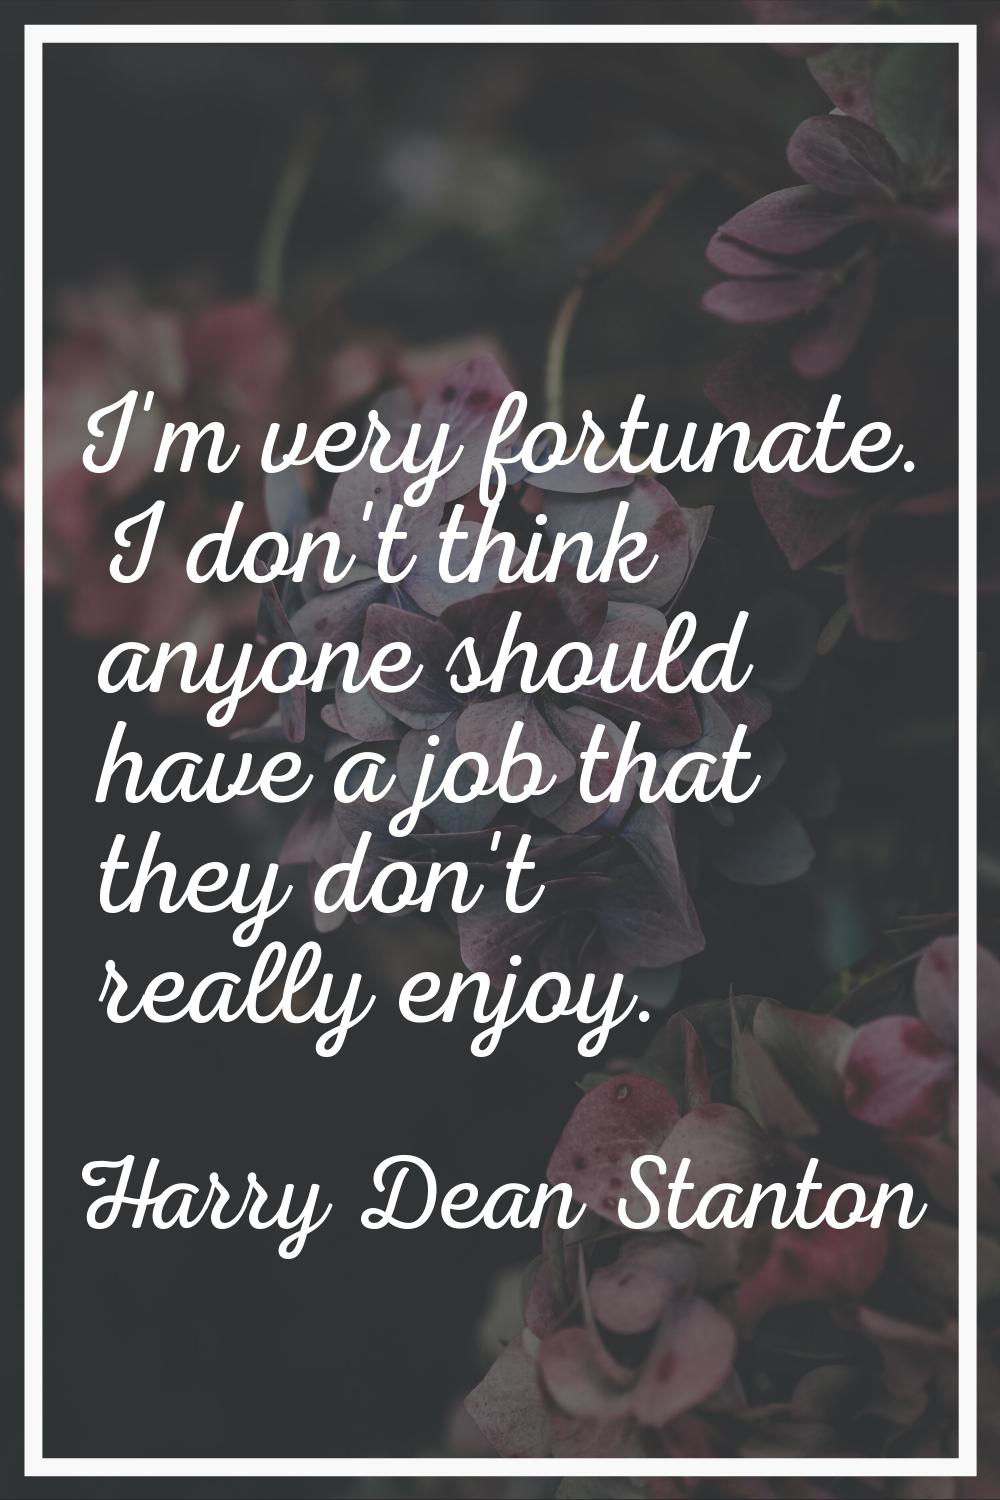 I'm very fortunate. I don't think anyone should have a job that they don't really enjoy.